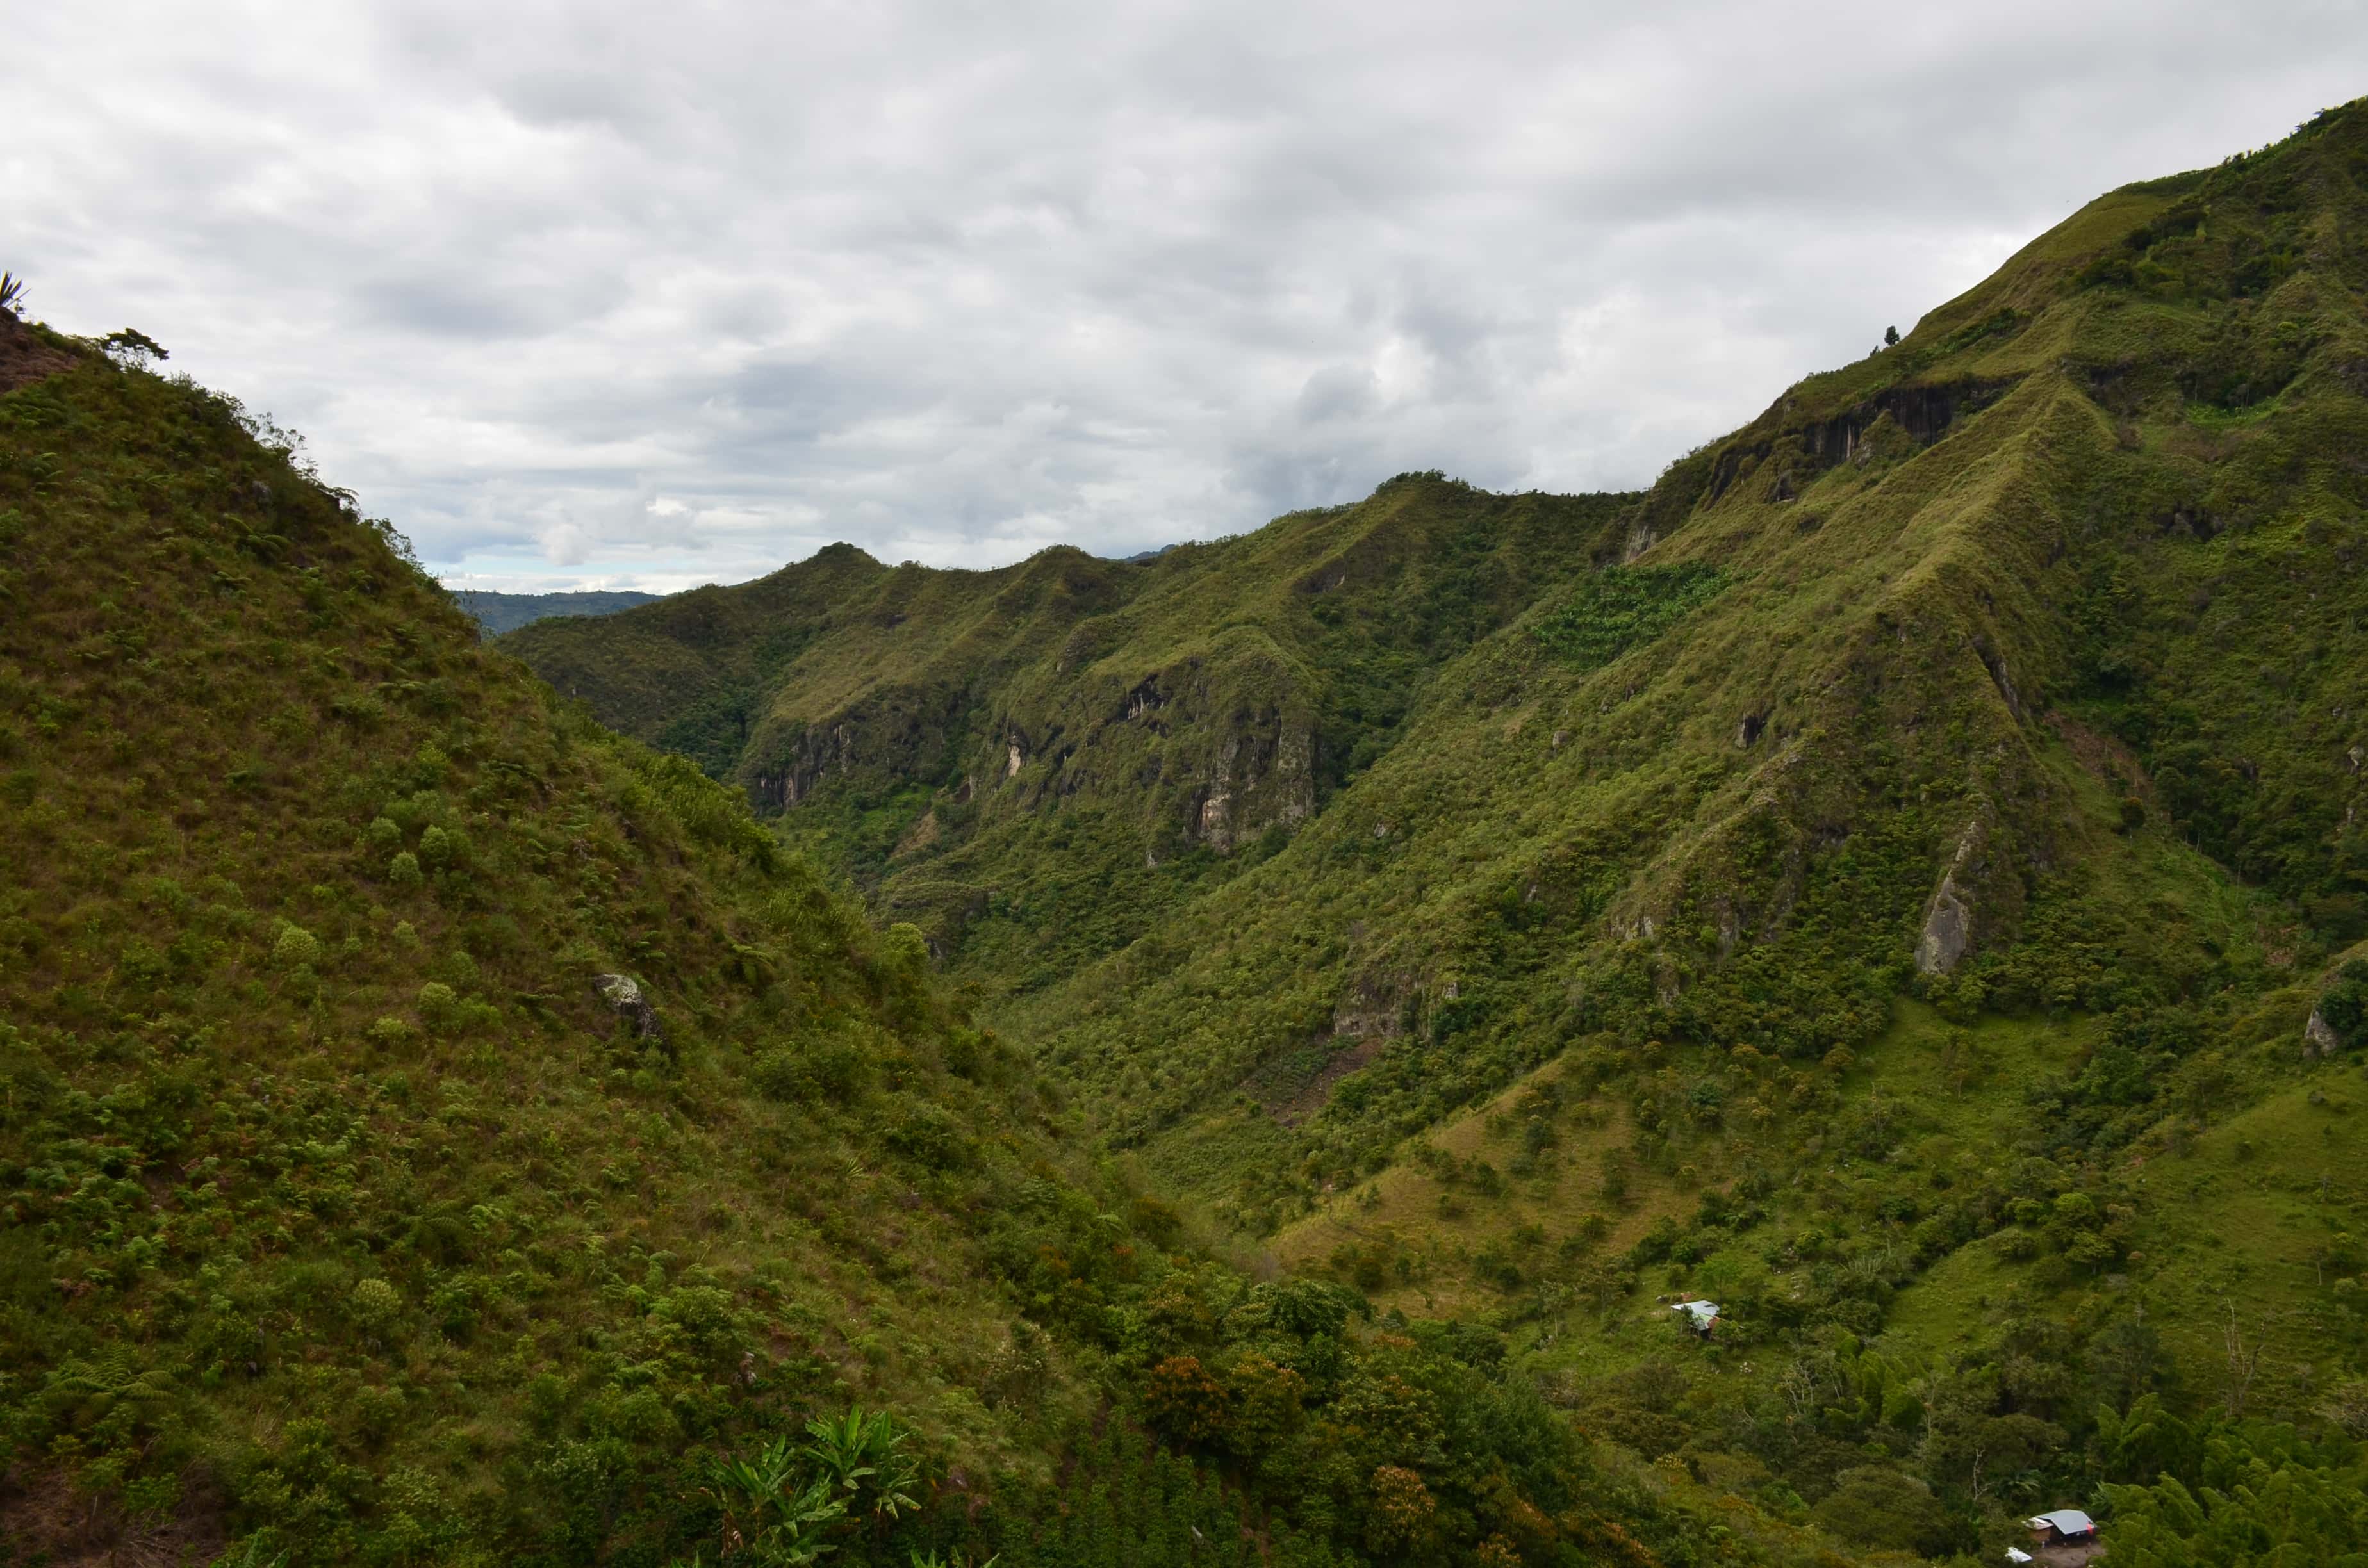 Our view after the first climb at Tierradentro, Cauca, Colombia